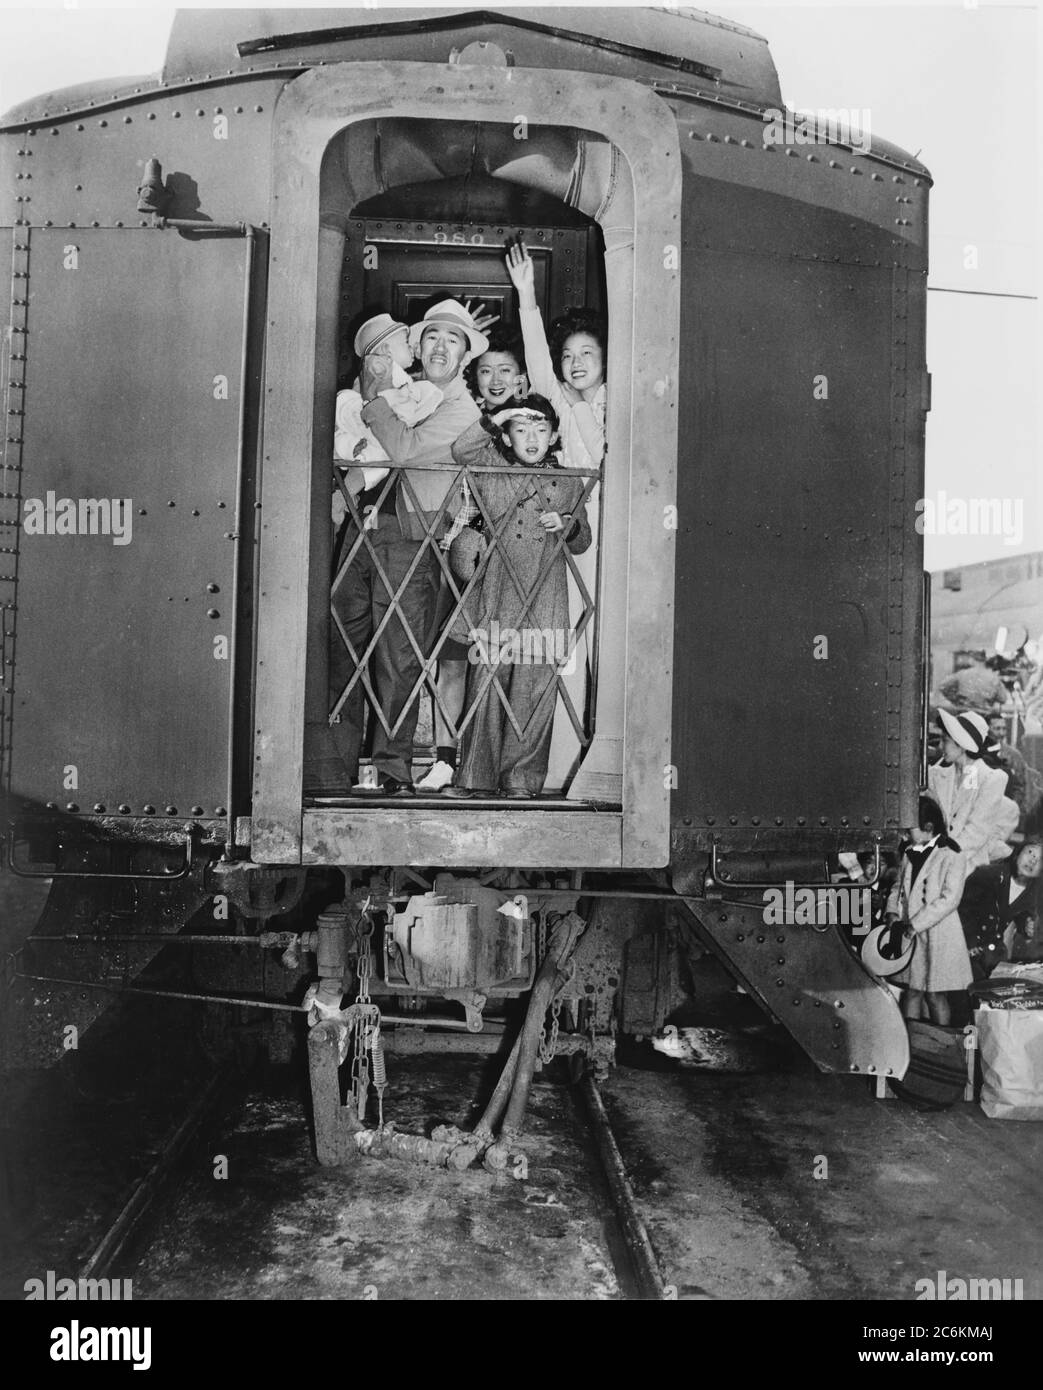 Group of Evacuees of Japanese Ancestry wave good-bye from rear of Train, Los Angeles, California, USA, U.S. Army Signal Corps, 1942 Stock Photo